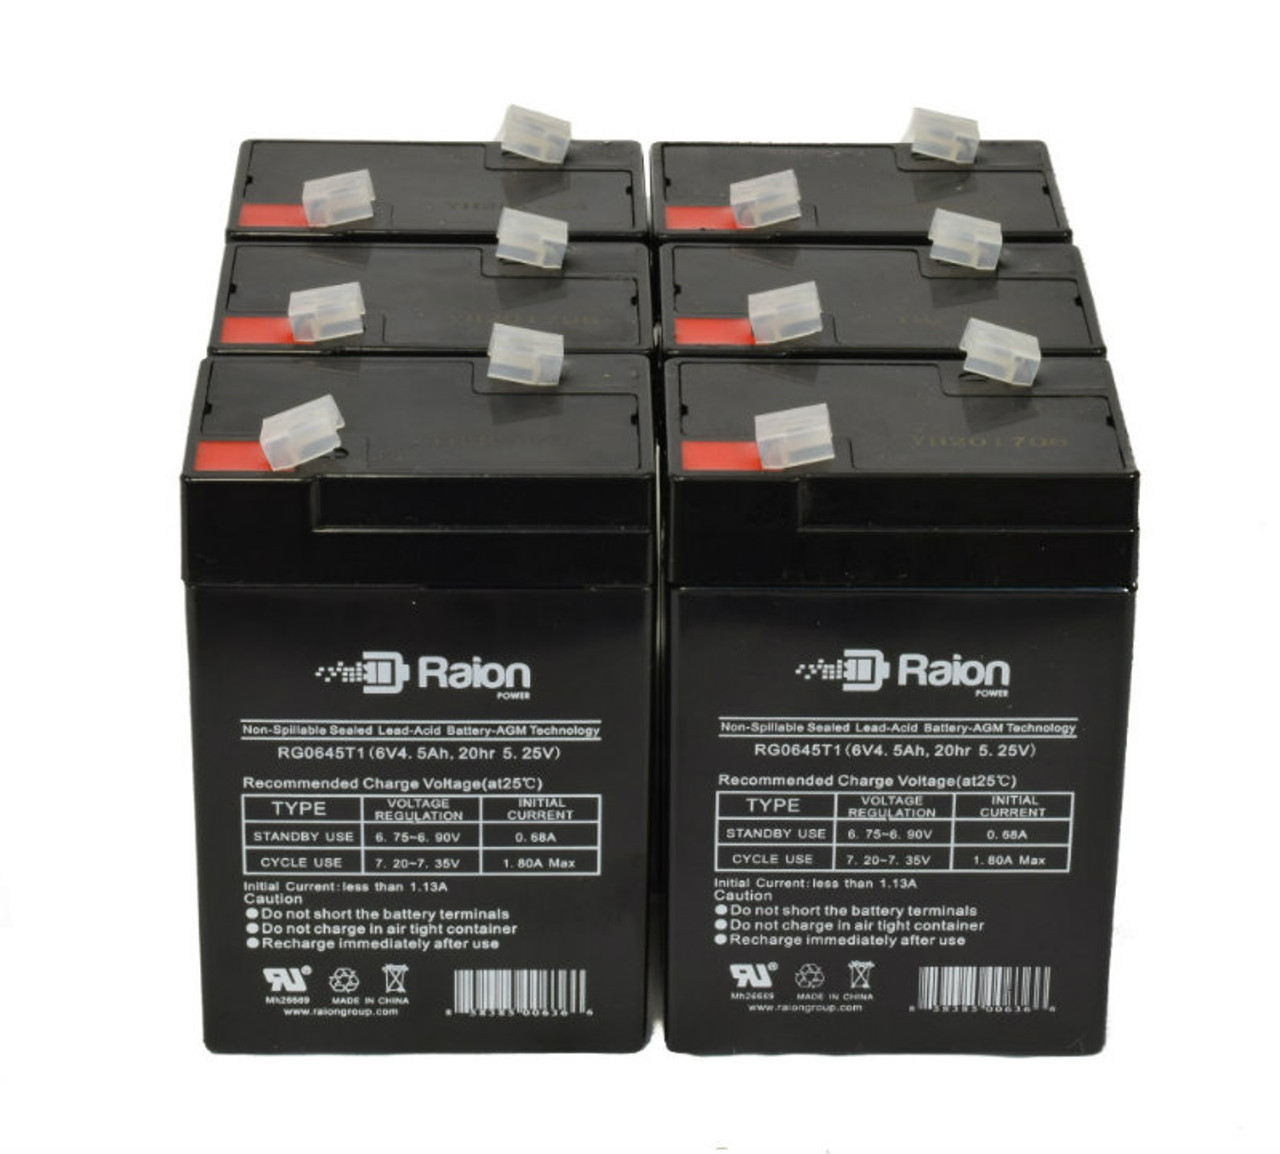 Raion Power RG0645T1 6V 4.5Ah Replacement Medical Equipment Battery for Philips Medical Systems H102 Communicator - 6 Pack